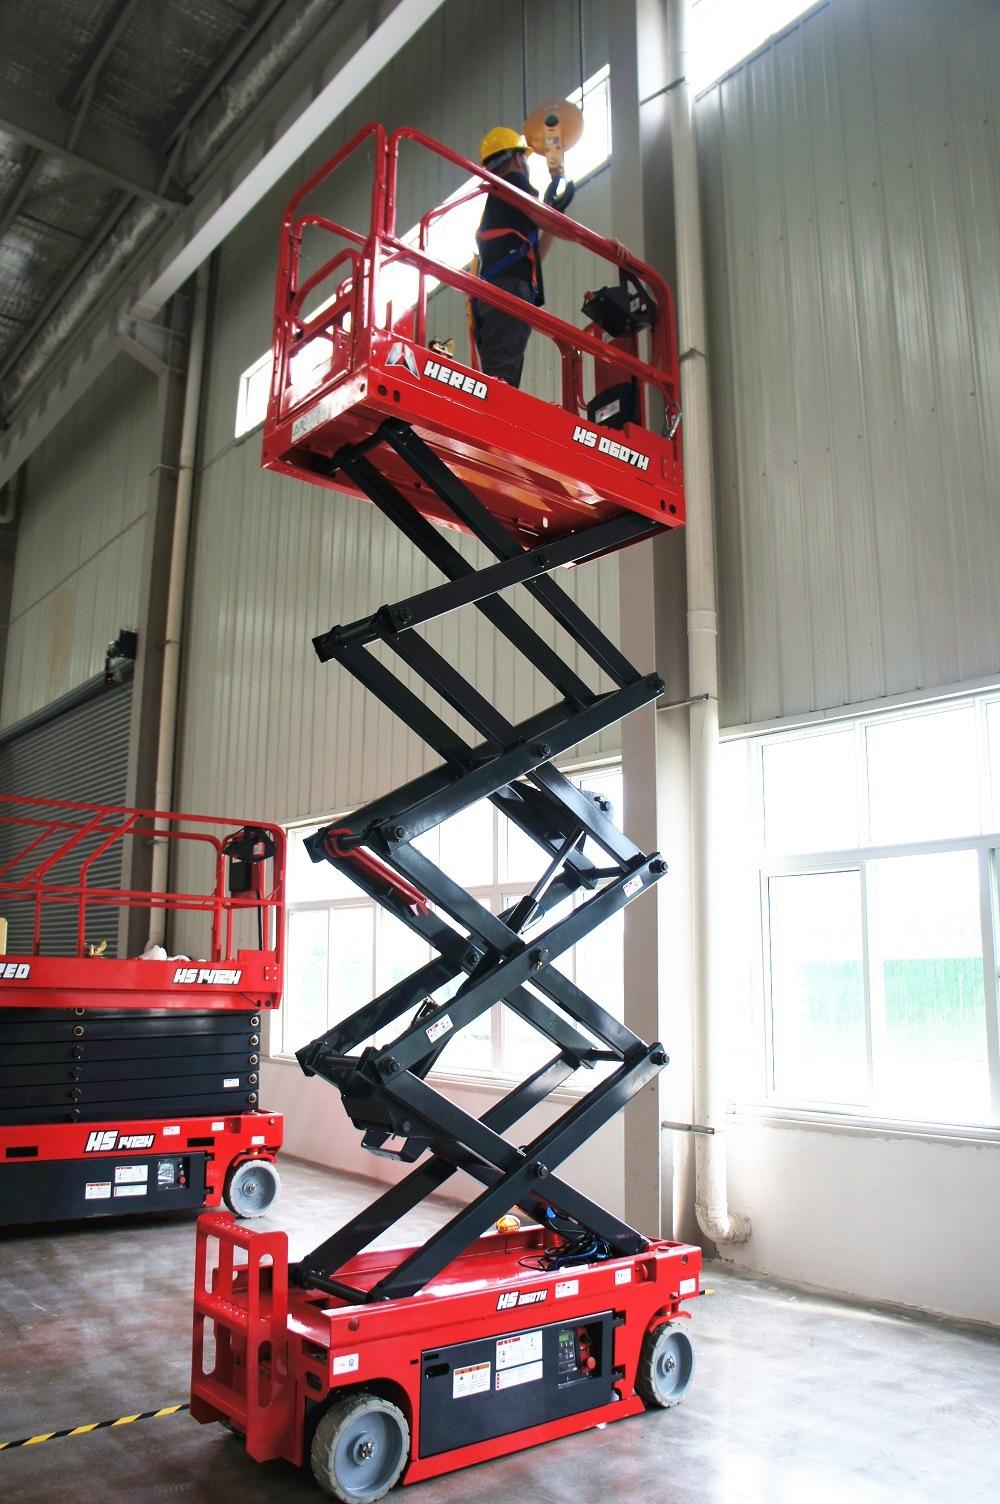 Access Hire Awp Ewps 4-15m Hydraulic Electric Scissor Manlift Elevated Working Platform Equipment for Rental Company